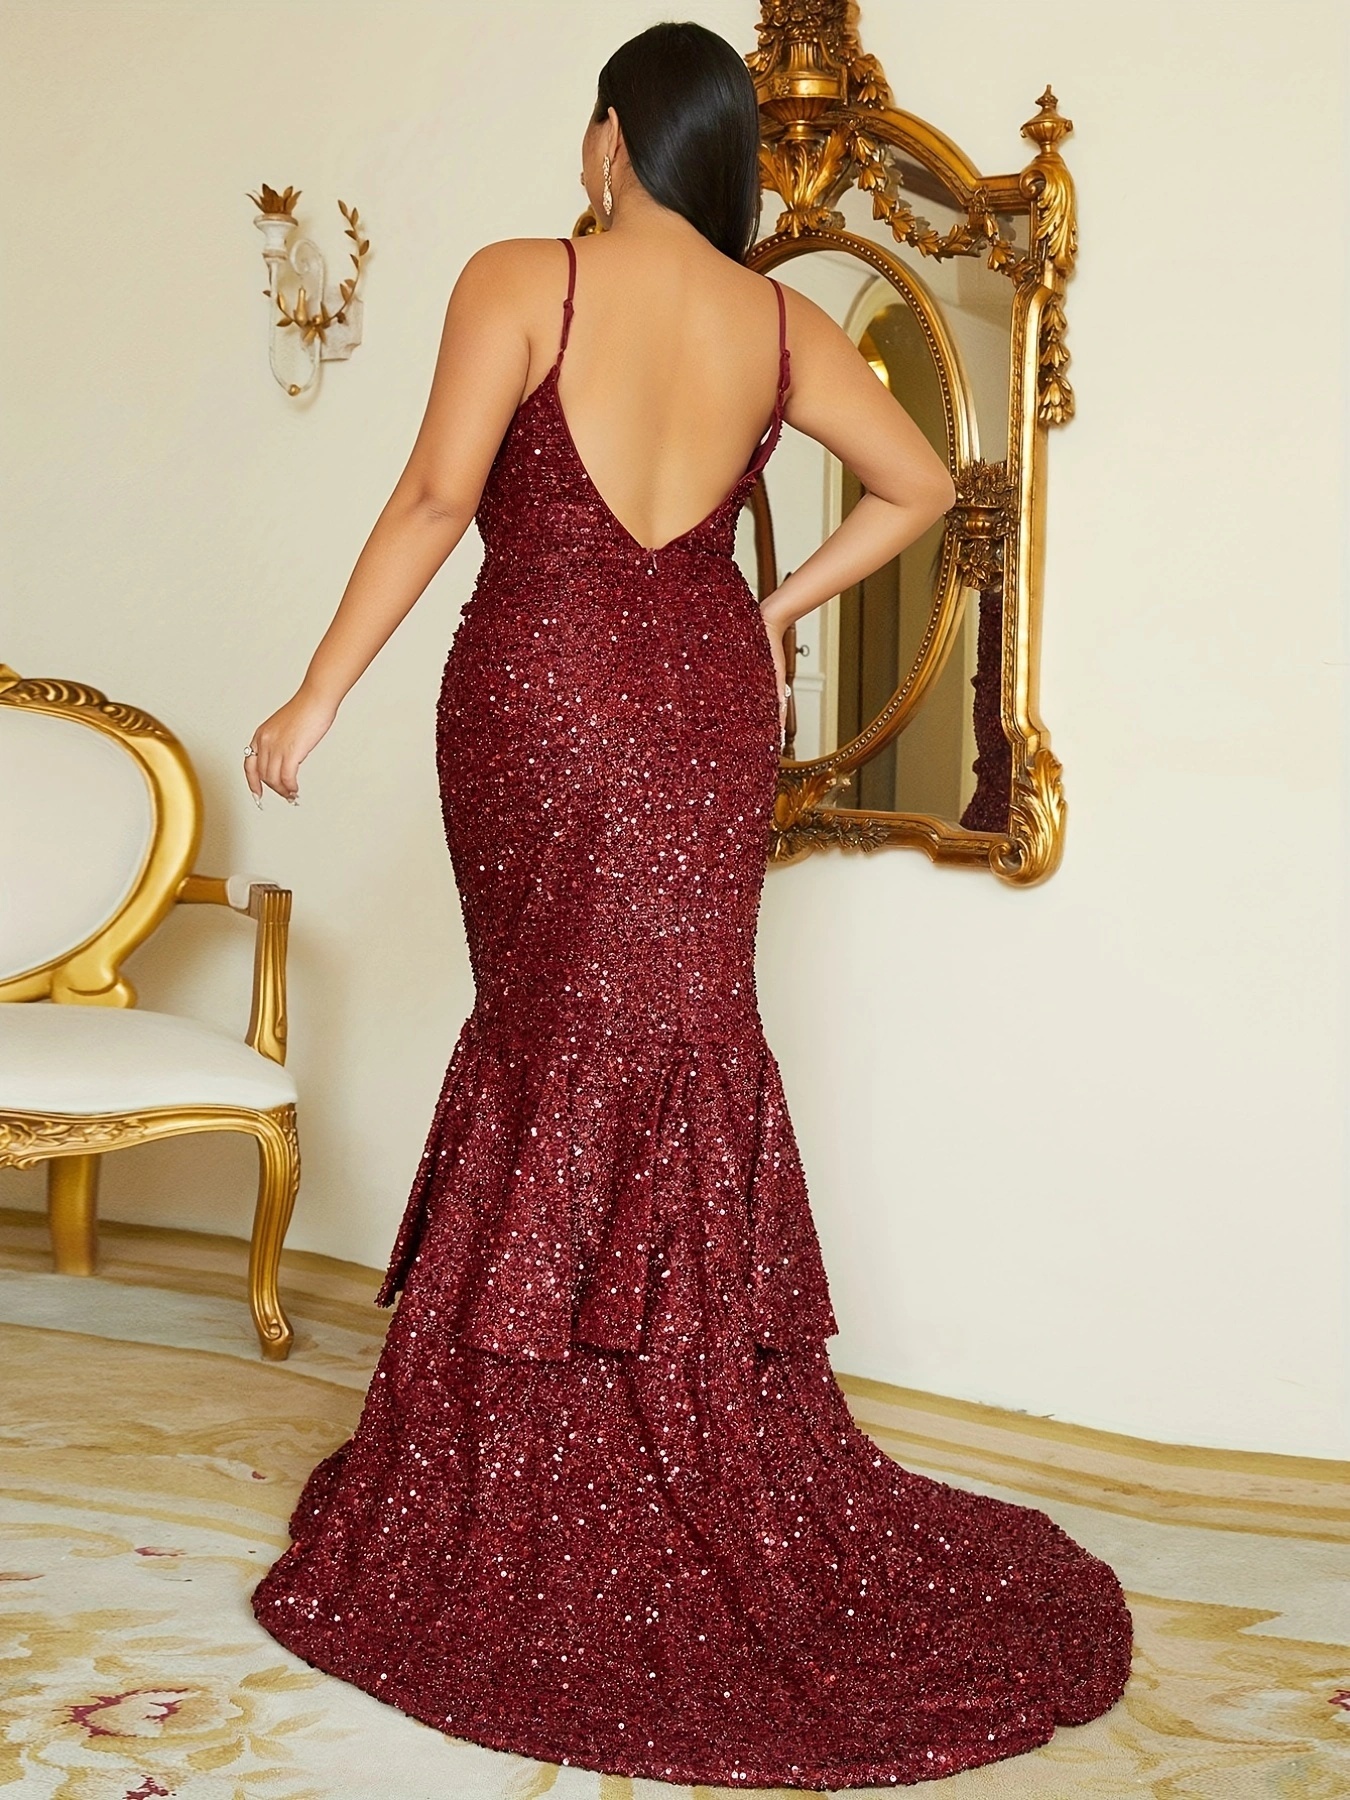 Wine Red Sequin Dress With Spaghetti Straps For Womens Slim Fit Bodycon  Party